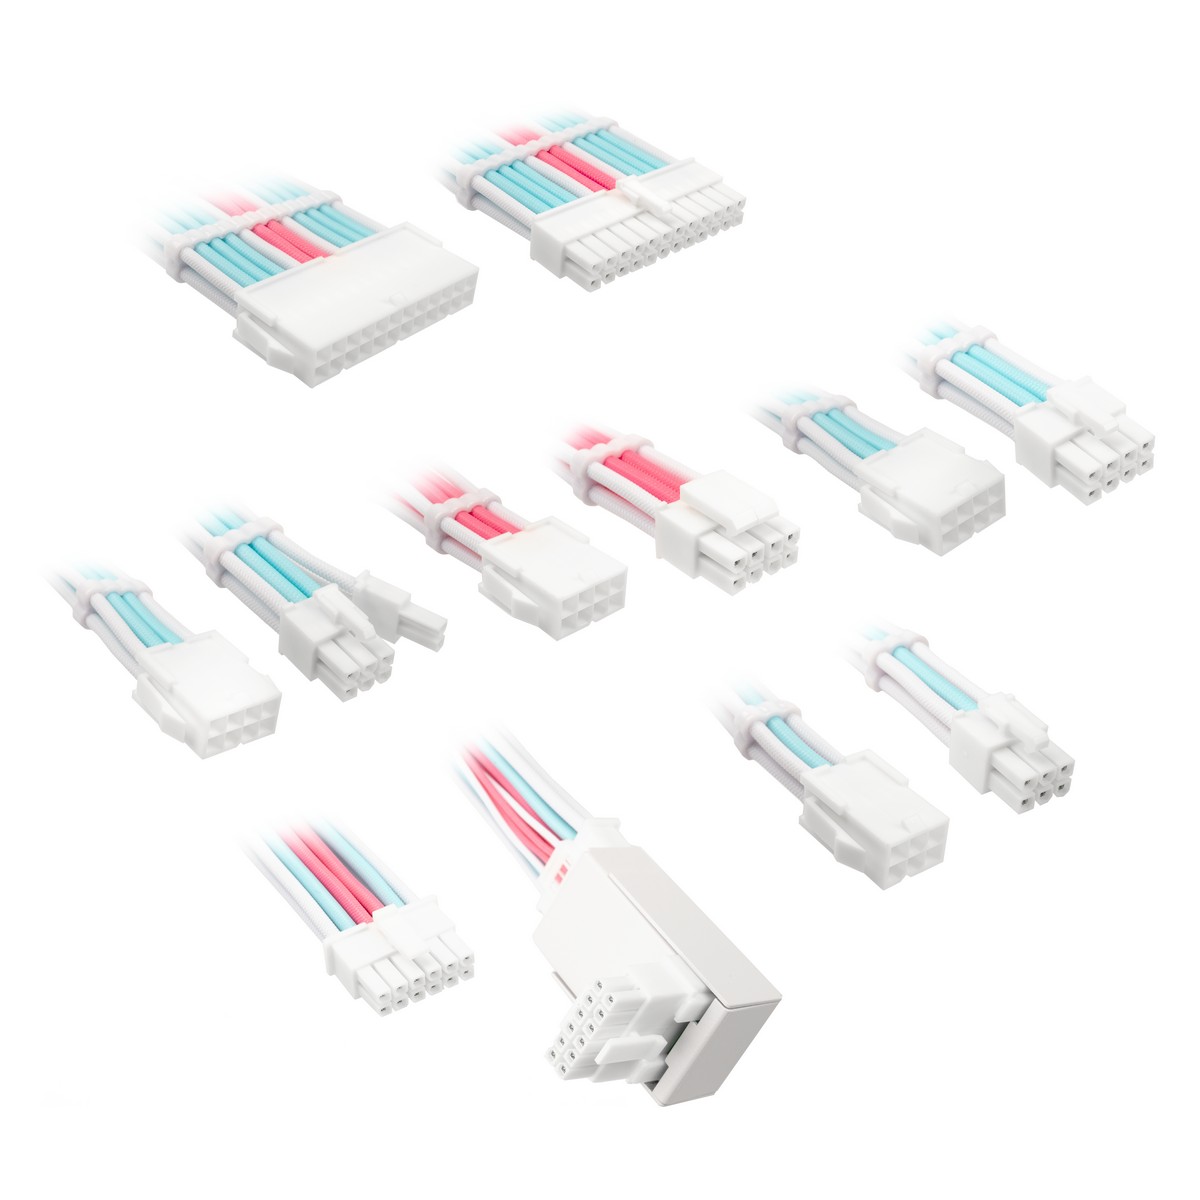 Kolink Core Pro Braided Cable Extension Kit 12VHWPR Type 2 - Brilliant White/Neon Blue/Pure Pink